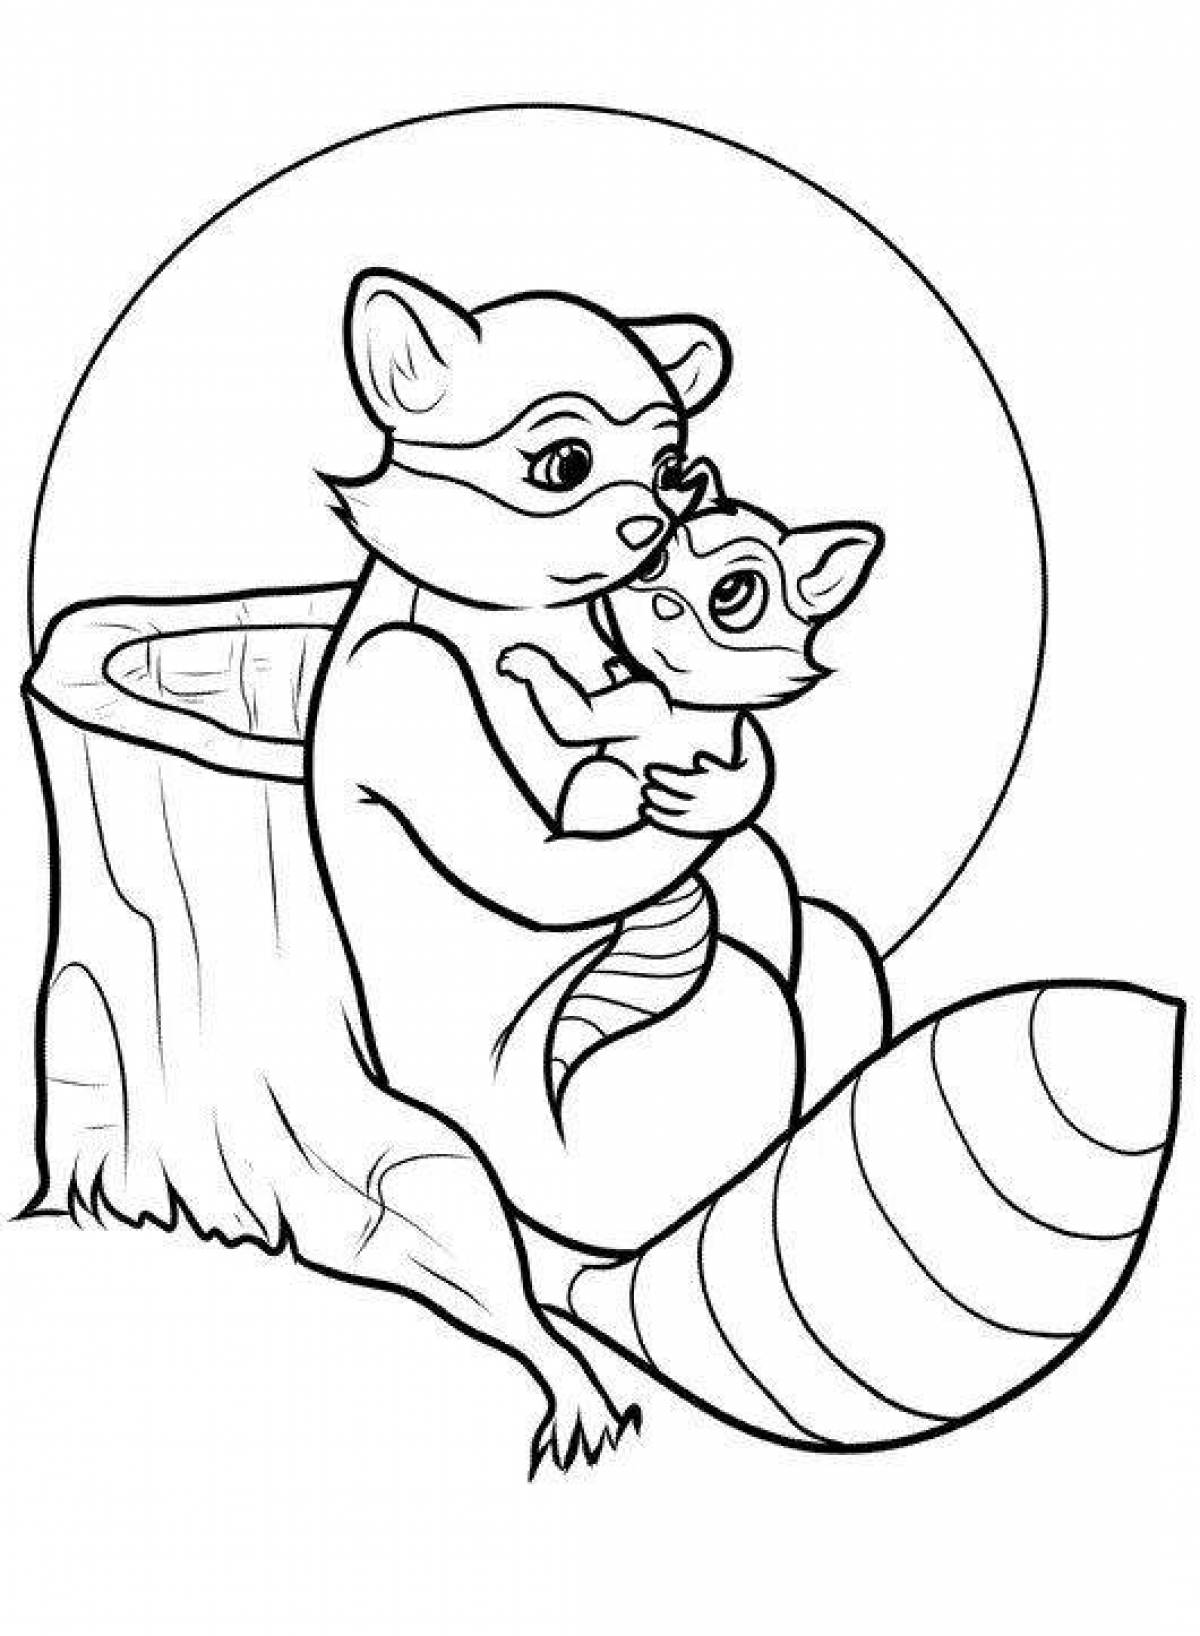 Sparkling raccoon coloring page